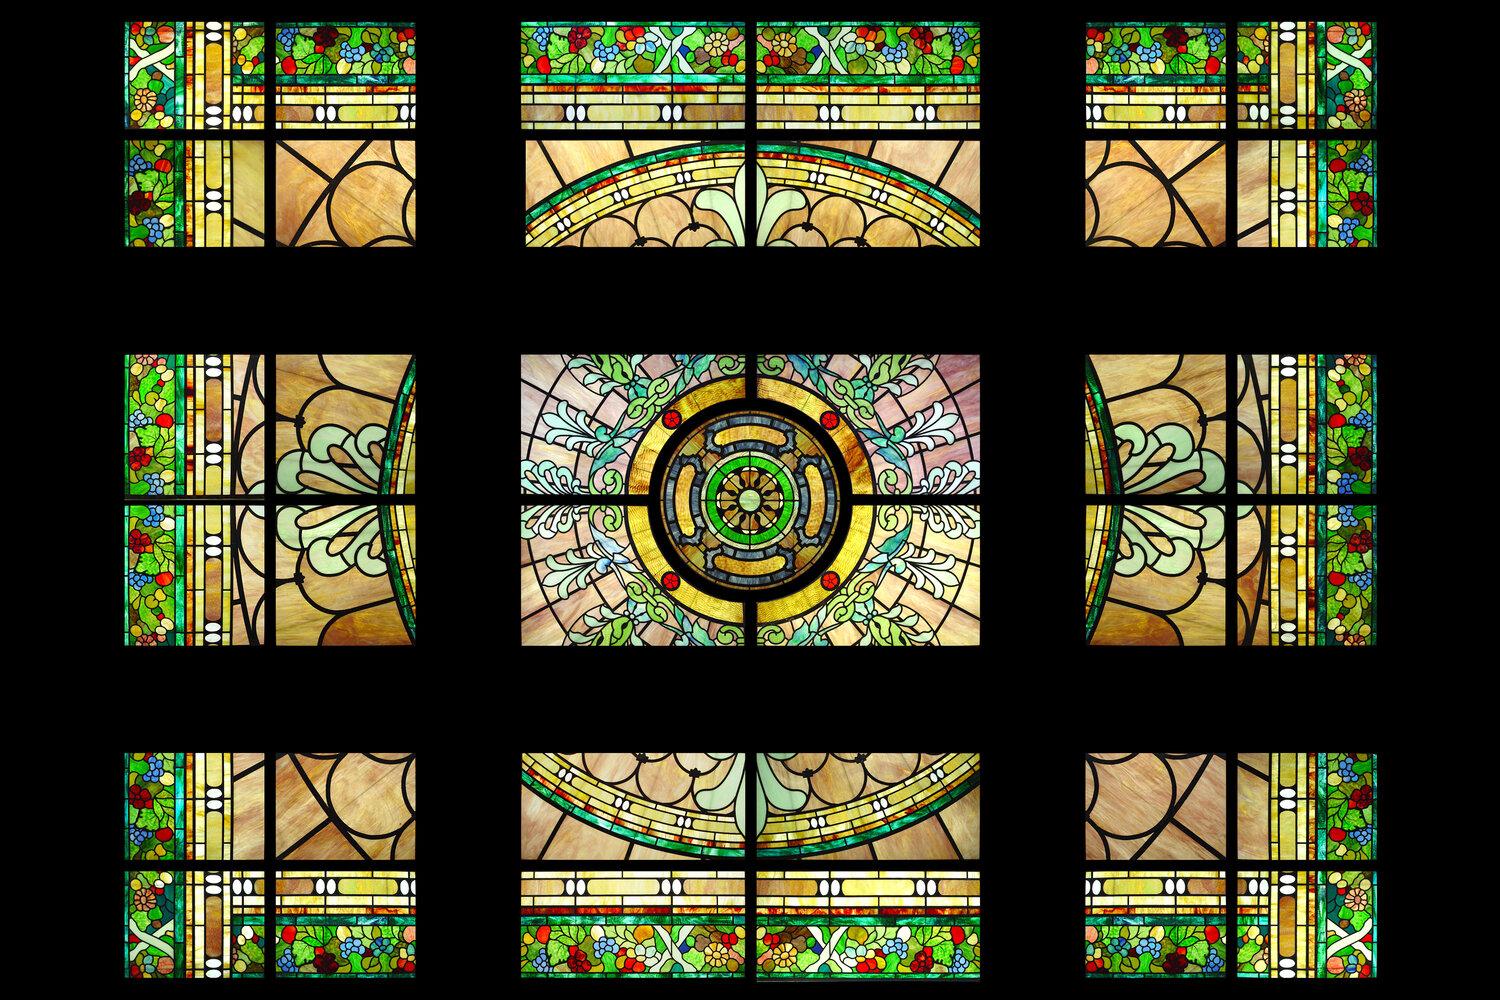 new stained glass windows, church stained glass, new church stained glass windows